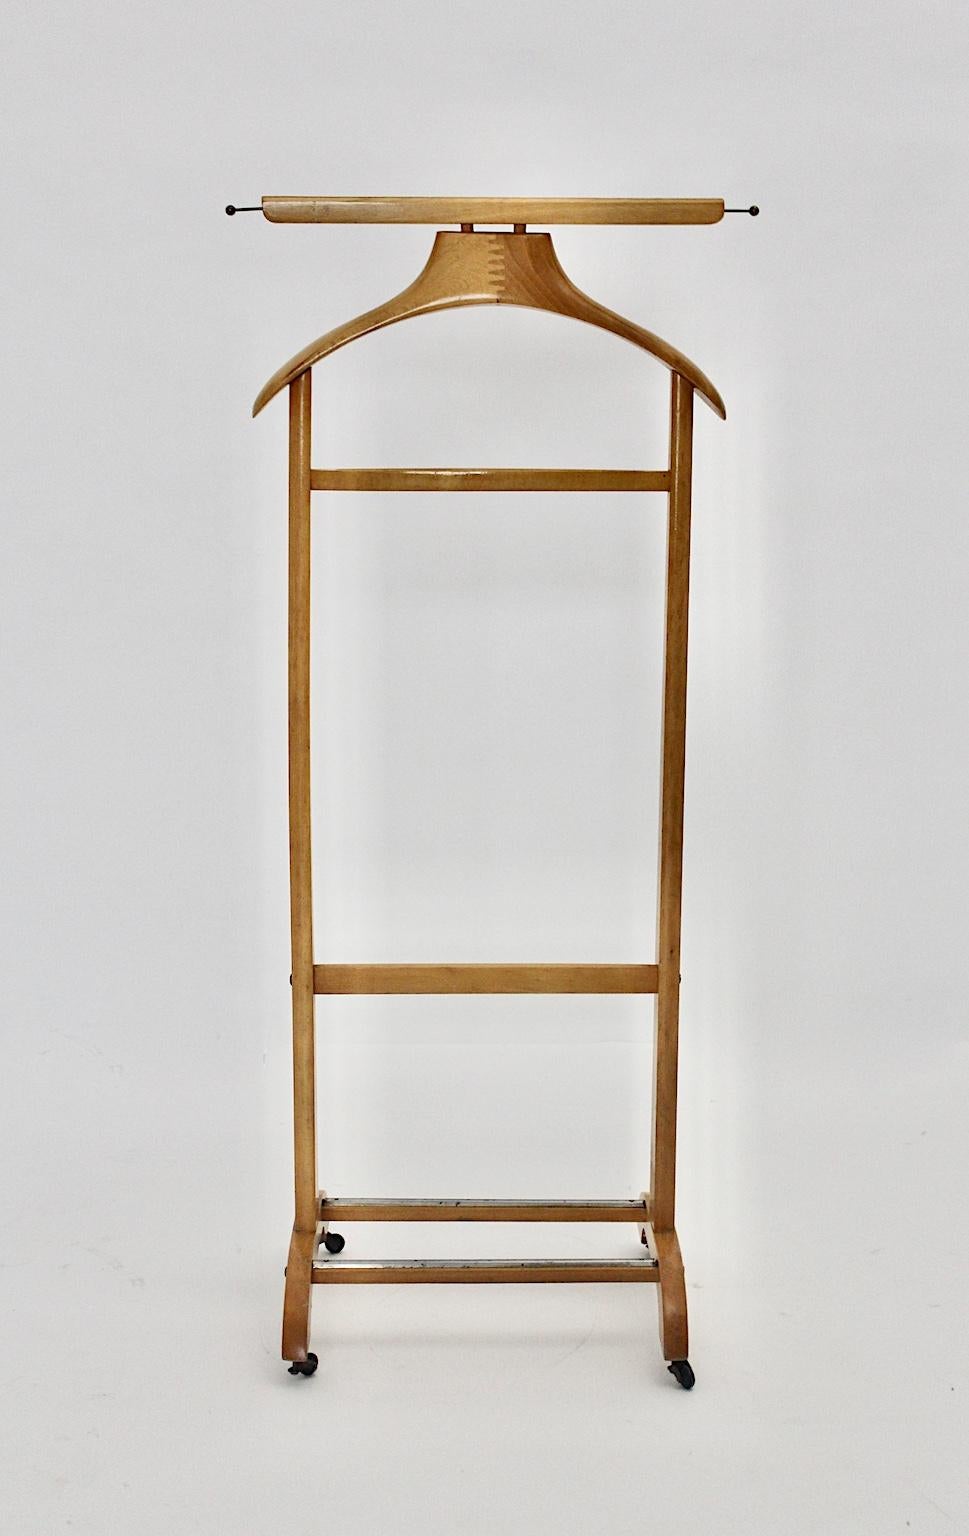 20th Century Mid-Century Modern Vintage Beech Valet, Ico and Luisa Parisi style, Italy, 1958 For Sale